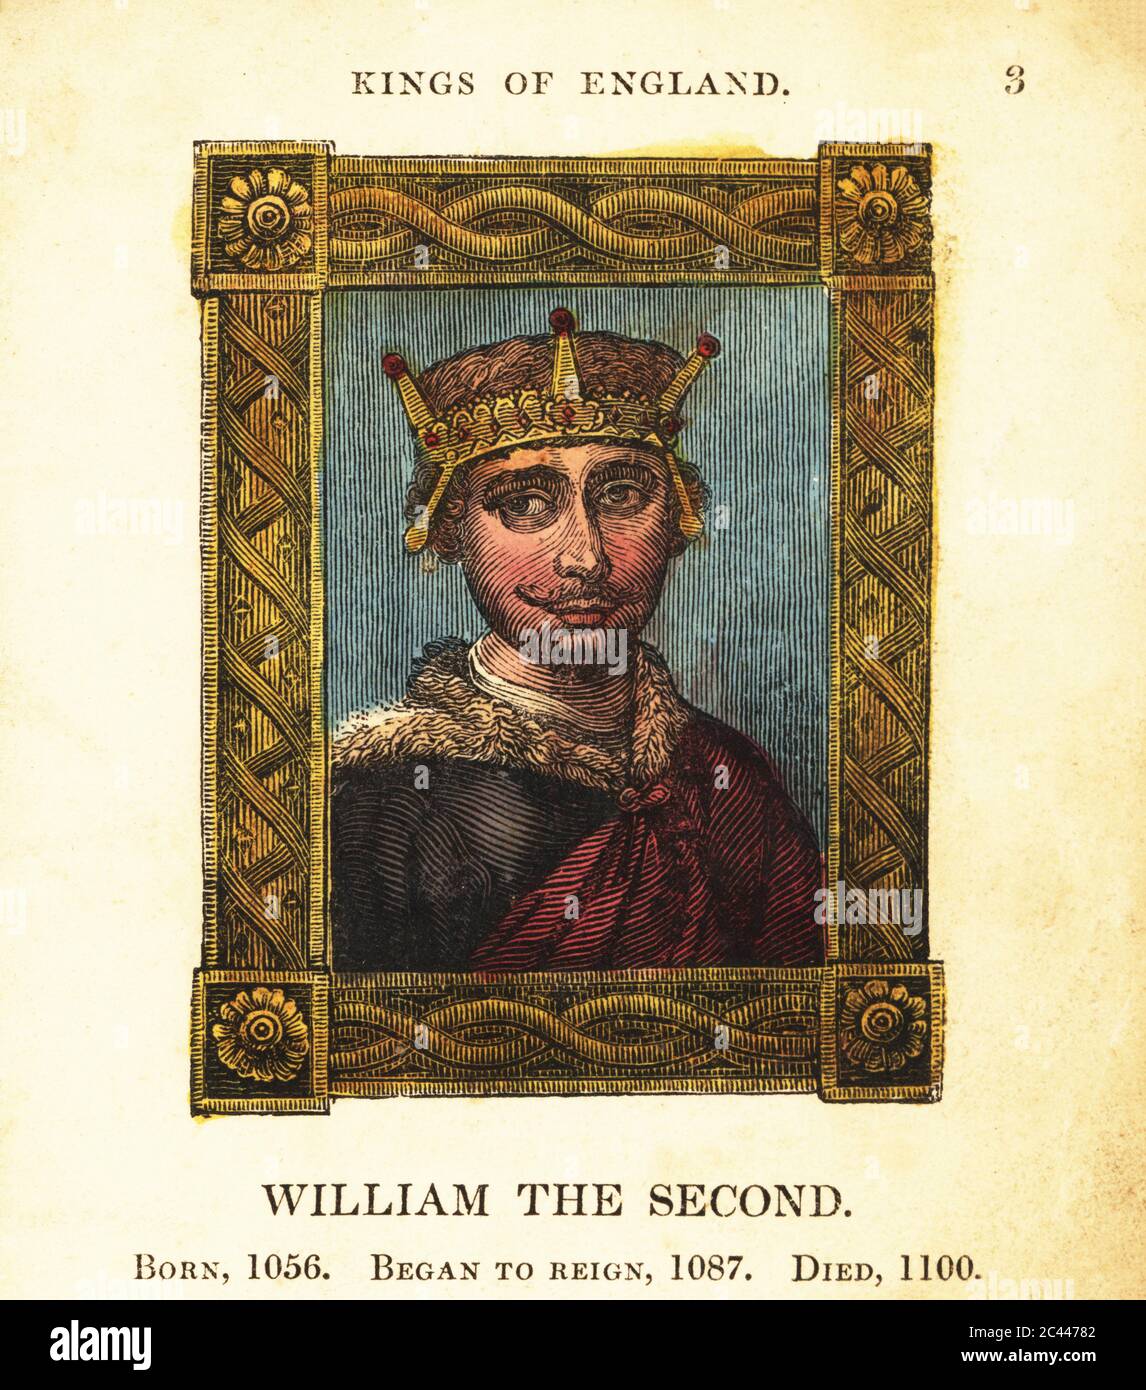 Portrait of King William II of England, born 1056, began reign 1087 and died 1100. In crown, fur-edged cape within ornate frame.  Handcolored engraving by Cosmo Armstrong from Portraits and Characters of the Kings of England, from William the Conqueror to George the Third, John Harris, London, 1830. Stock Photo